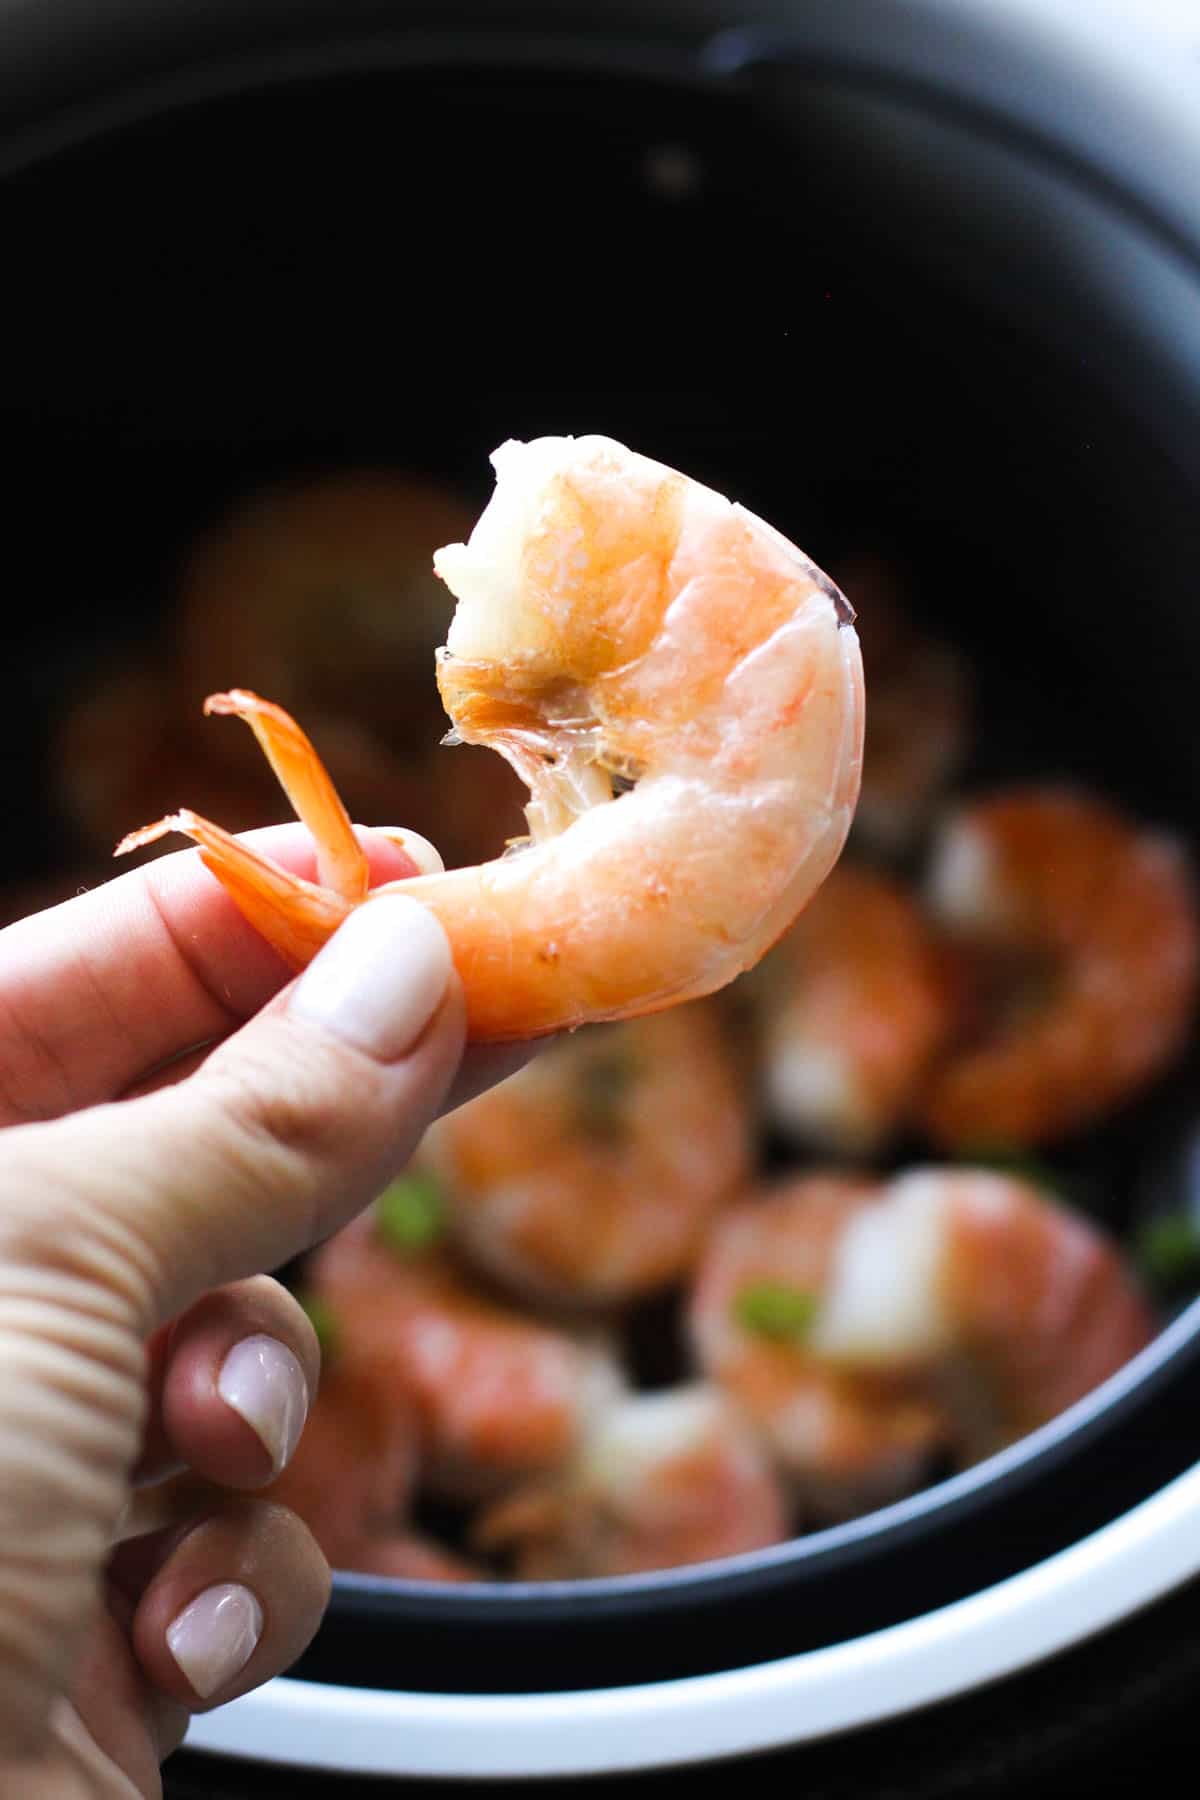 a piece of cooked shrimp in hand